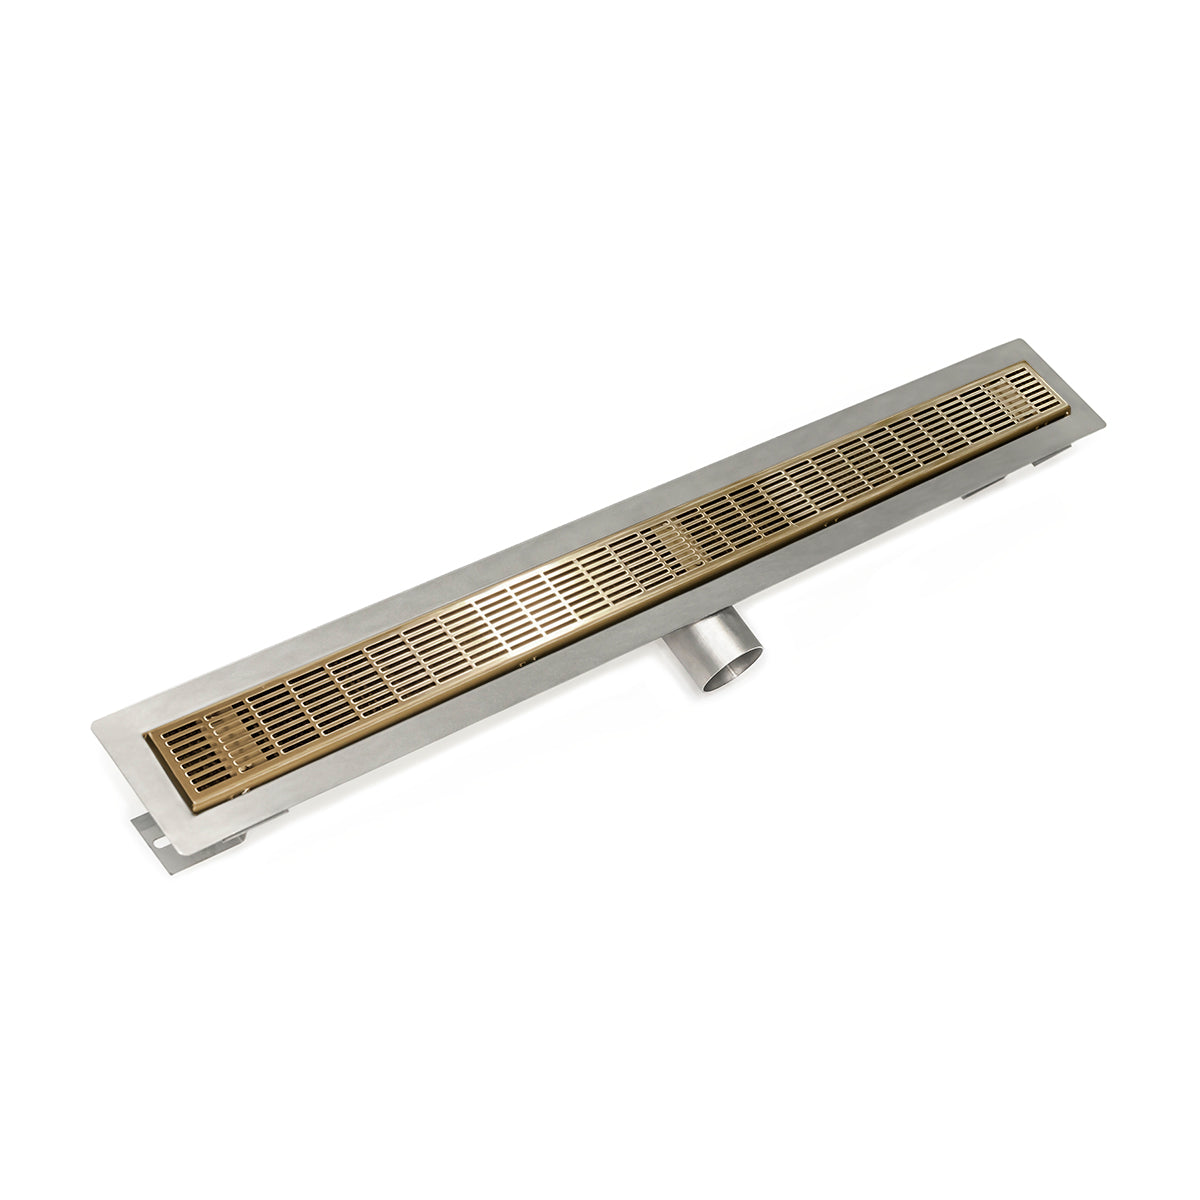 Infinity Drain 60" FT Series Side Outlet Linear Drain Kit with 2 1/2" Perforated Slotted Grate